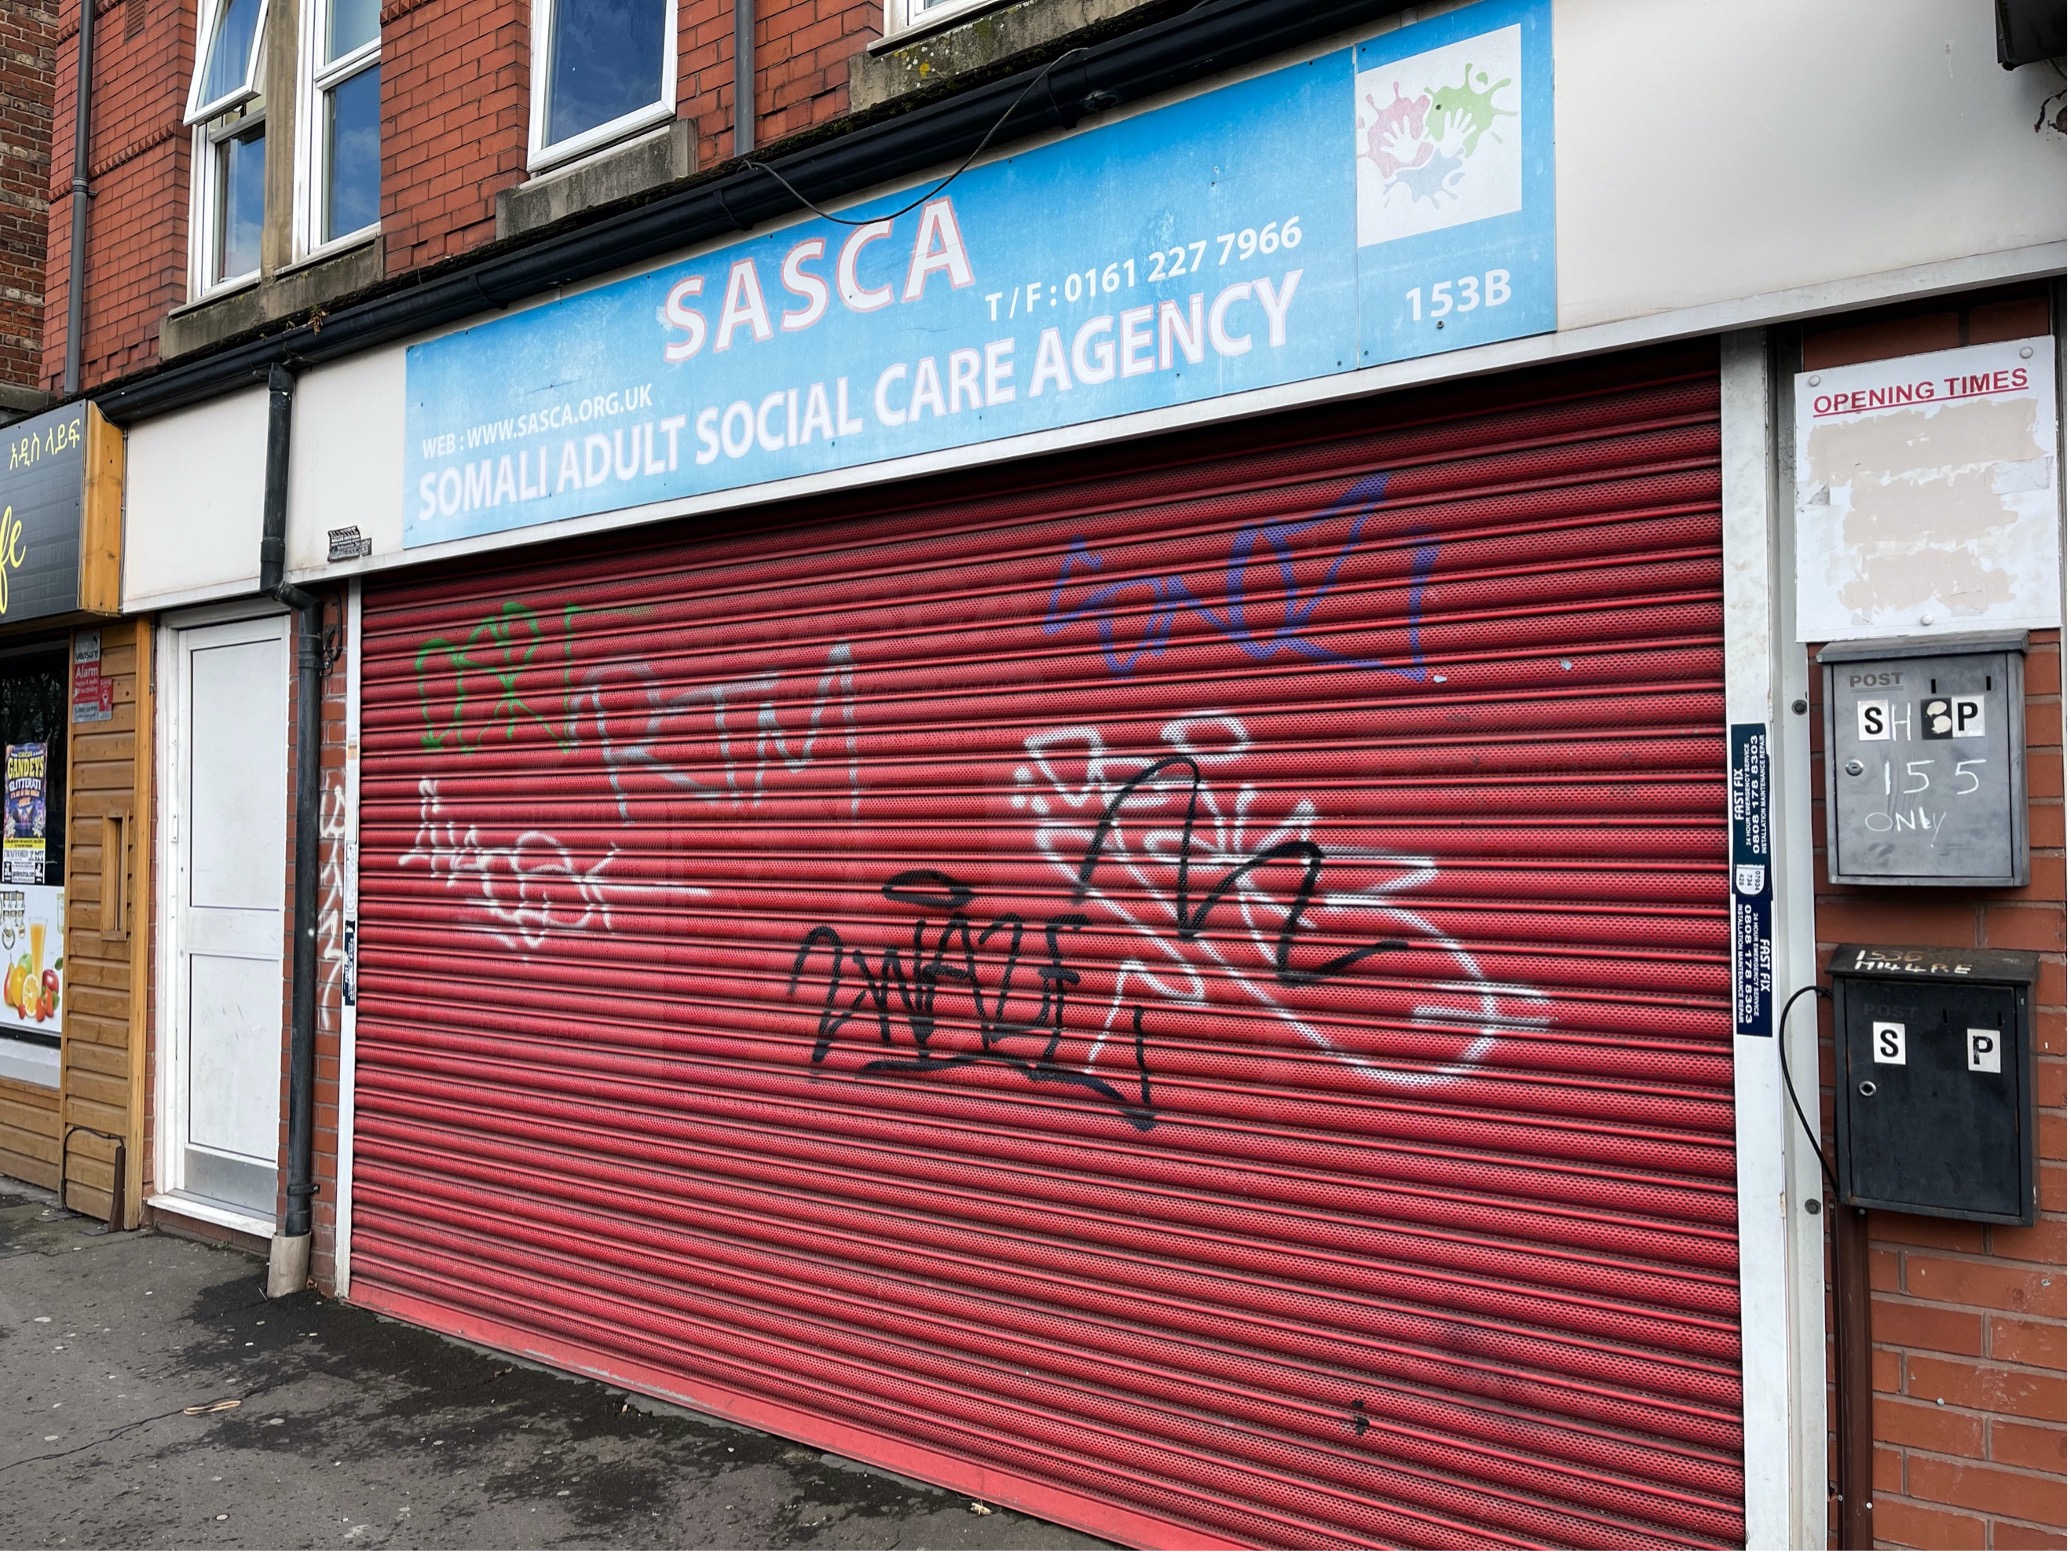 SASCA charity building in Moss Side with shutters closed, covered in graffiti